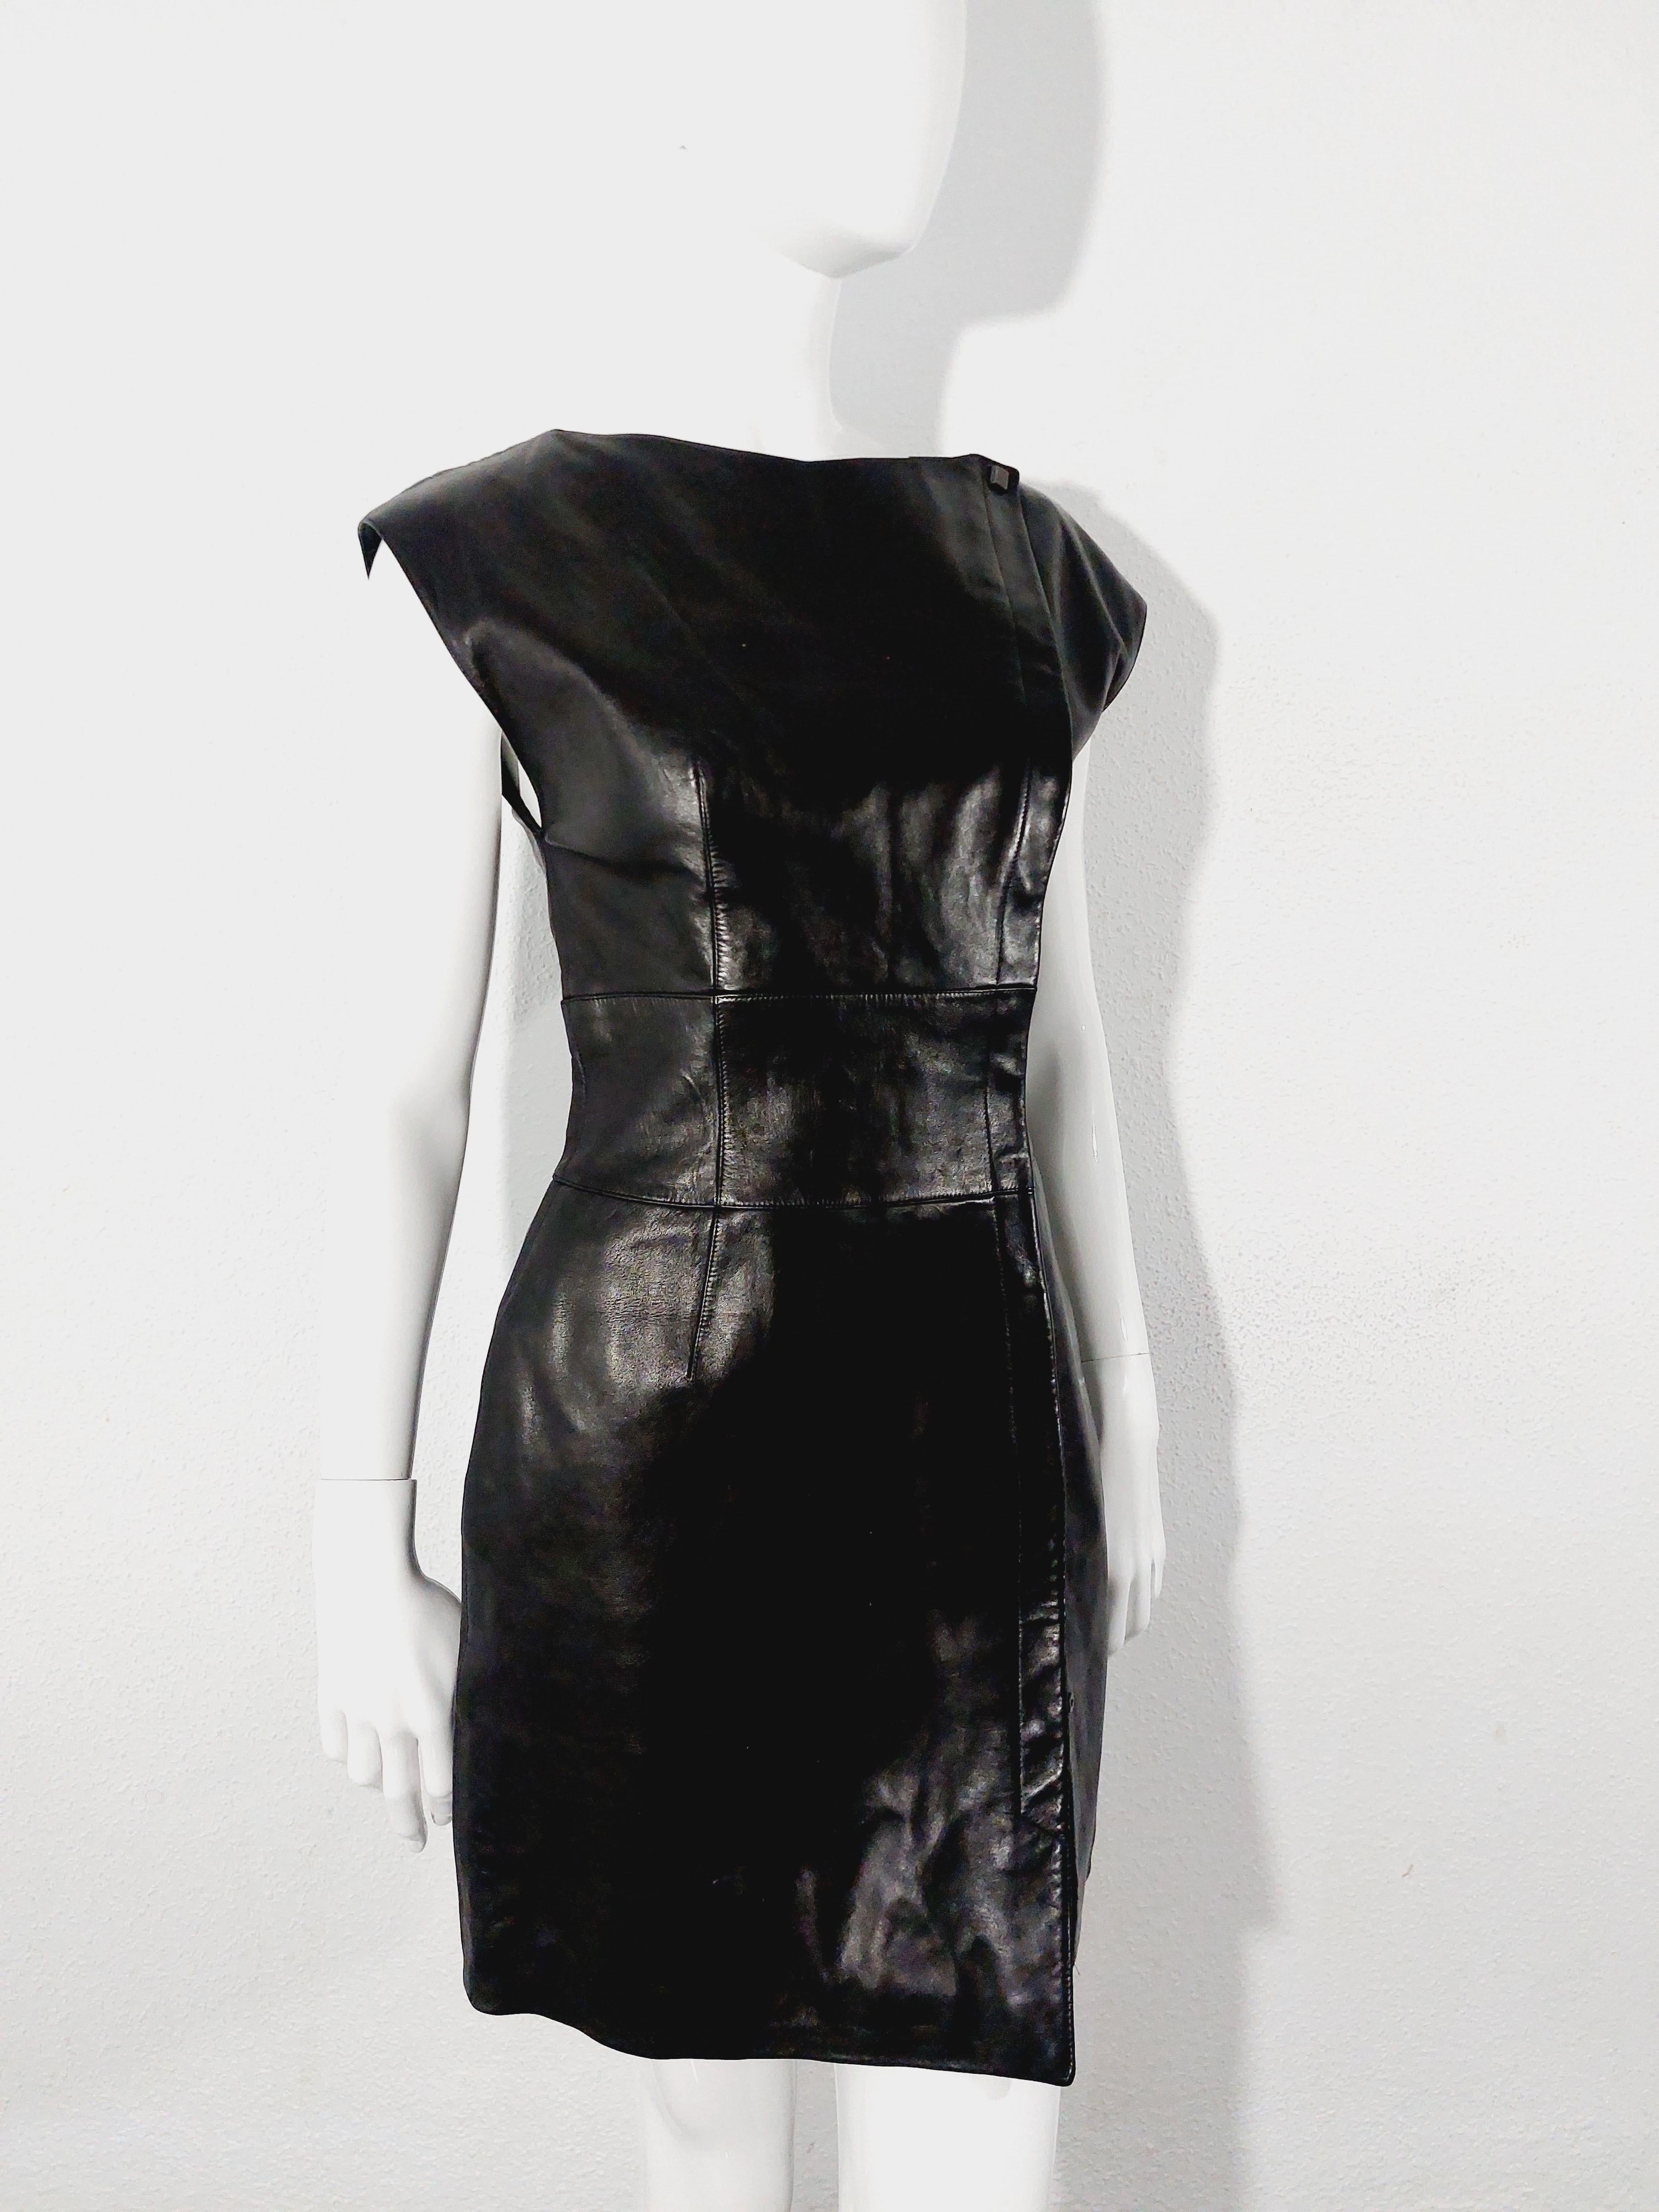 Thierry Mugler Couture Lambskin Leather Snap Black Evening Wrap Split Sculptural Mini Dress
Rare Black leather dress with snap.Black satin lining. SIZE: 38 FR
Snap colusure.
Very good condition.
Fits XS/S, measurements:

Bust: 40 cm
Waist: 37